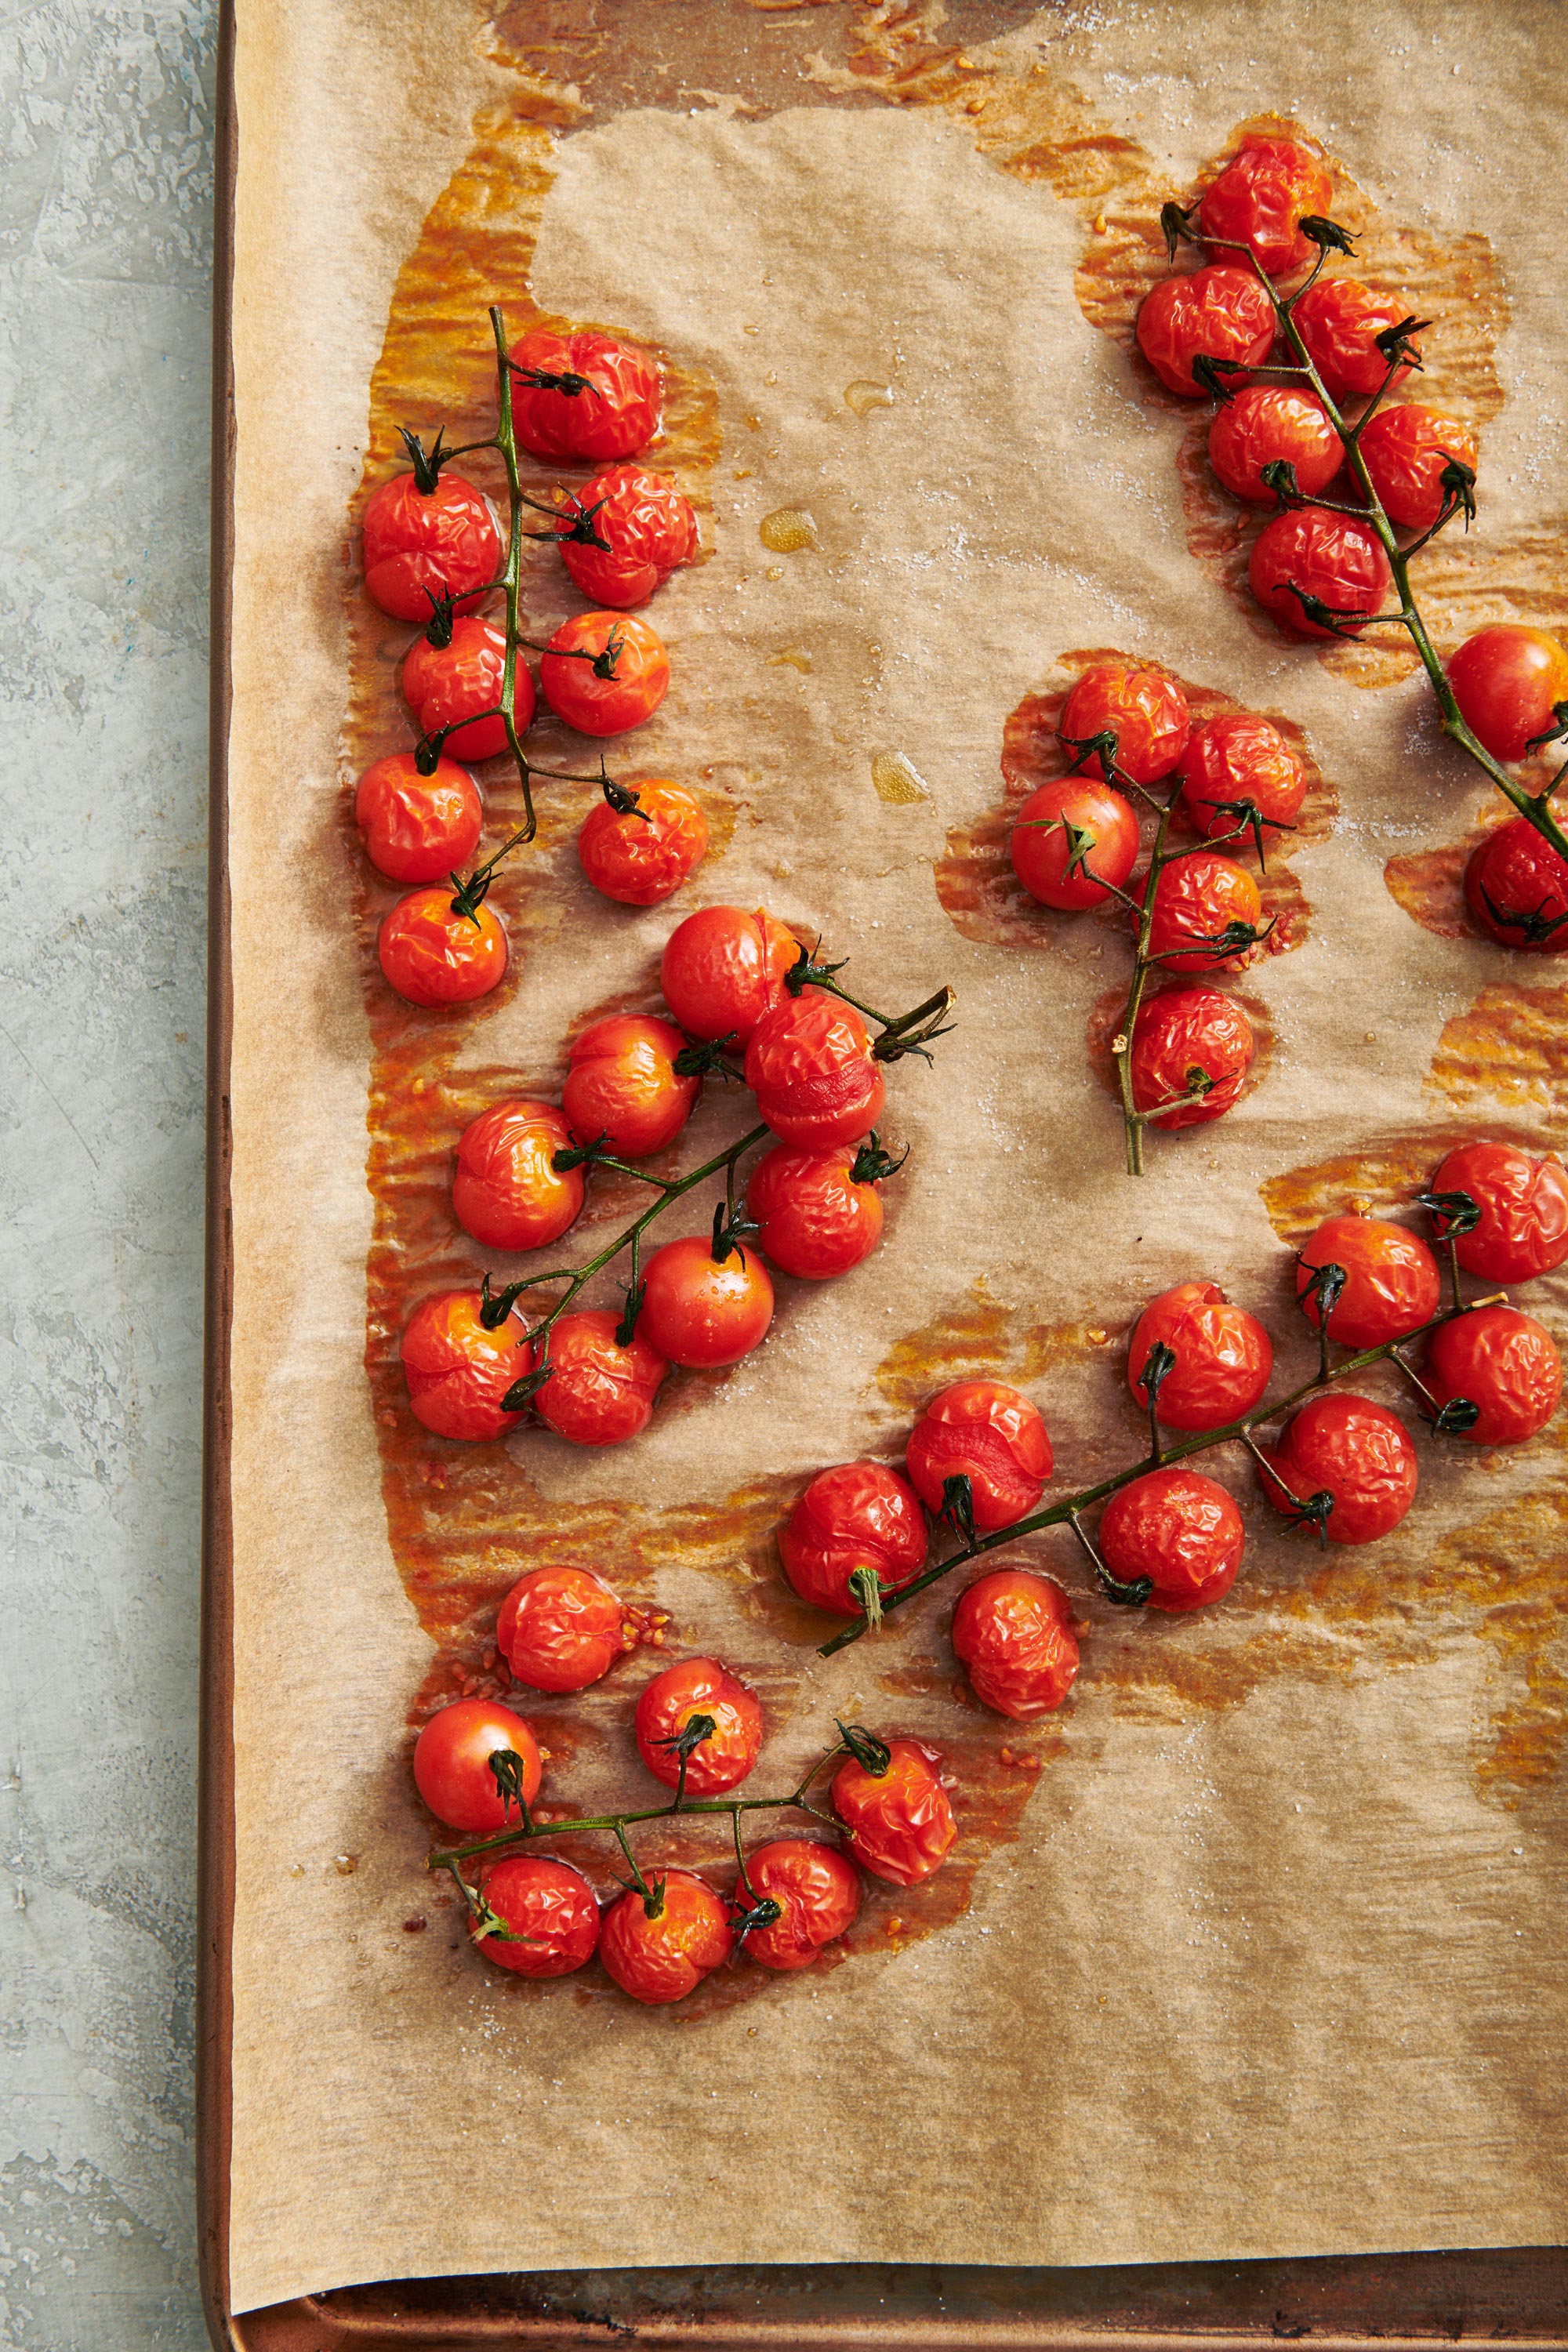 Roasted cherry tomatoes on baking tray covered with parchment paper.